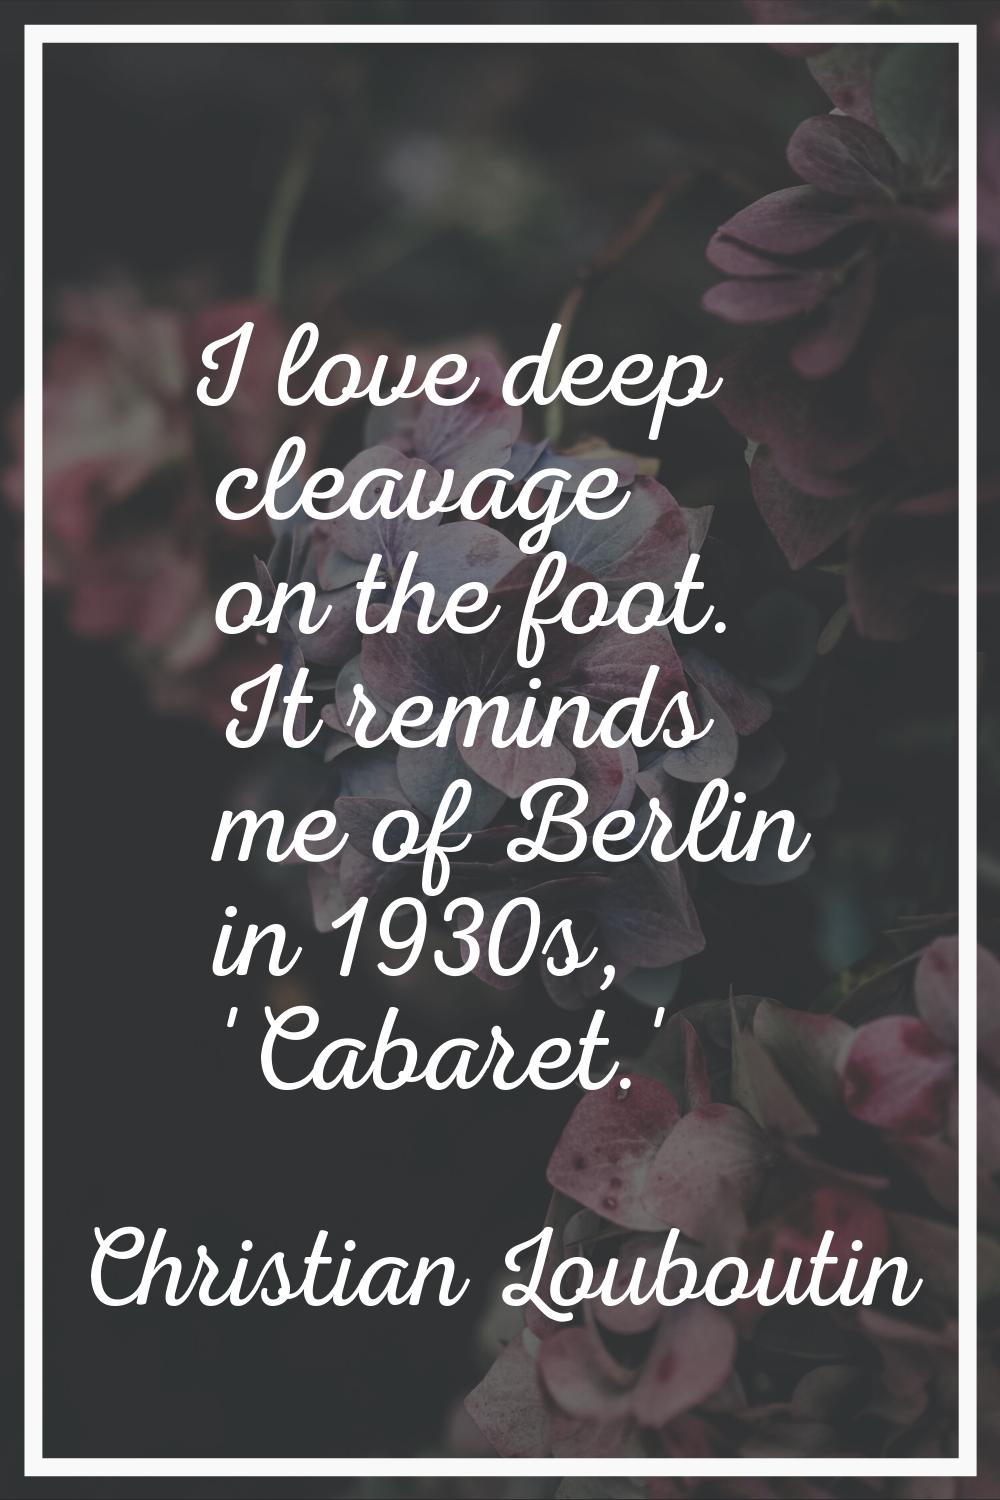 I love deep cleavage on the foot. It reminds me of Berlin in 1930s, 'Cabaret.'